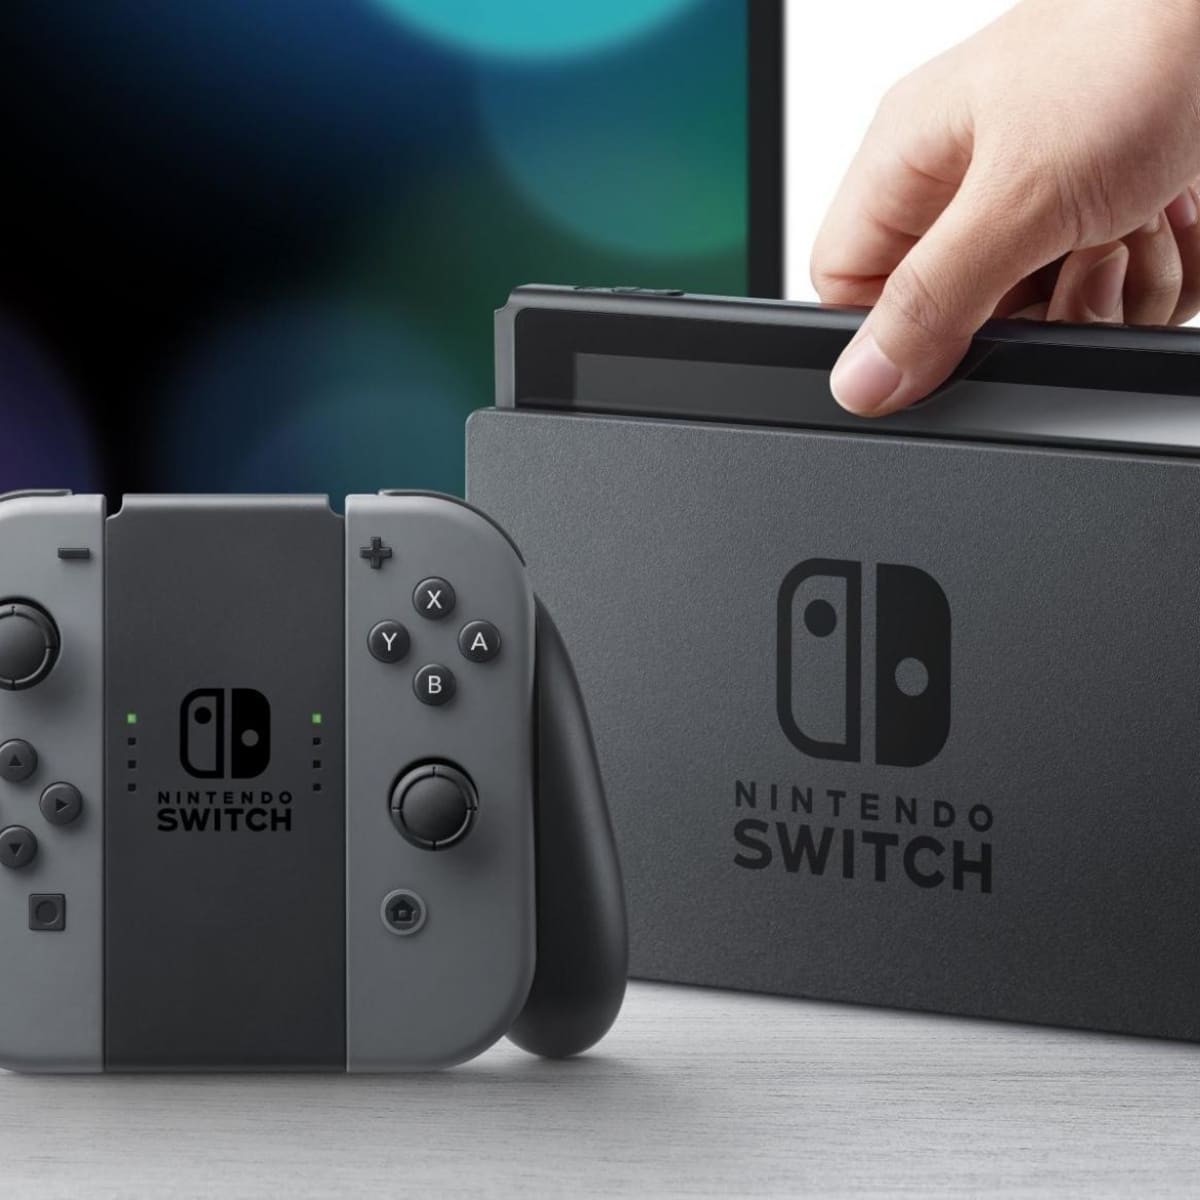 Why You should Get a Nintendo Switch Instead of a Wii U